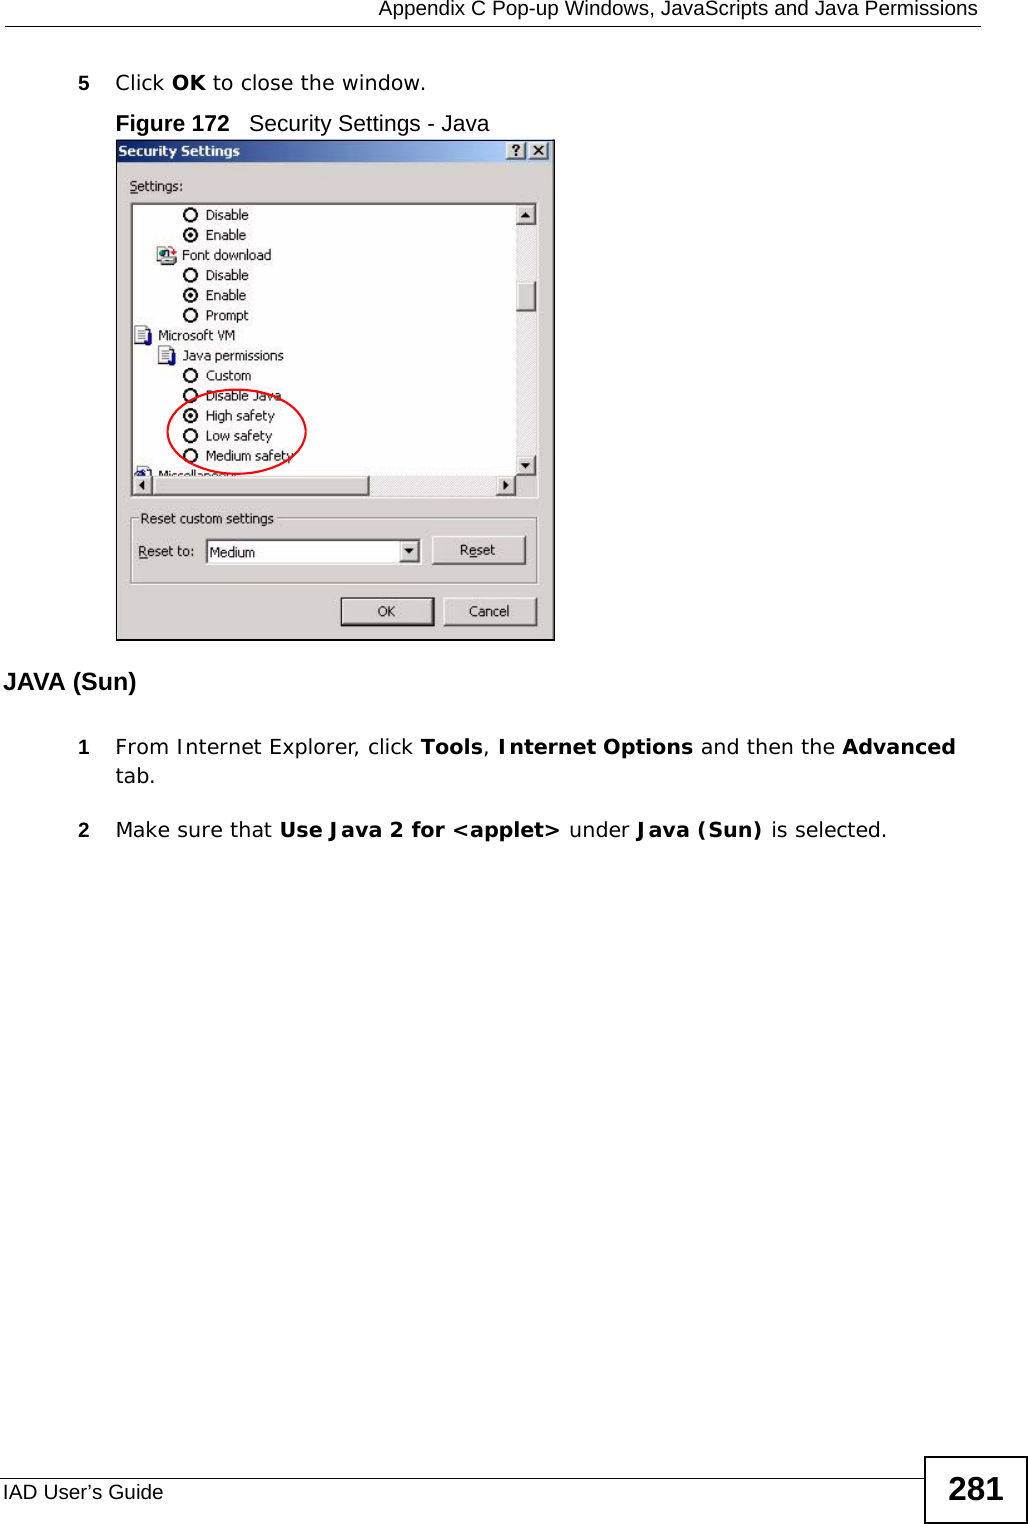  Appendix C Pop-up Windows, JavaScripts and Java PermissionsIAD User’s Guide 2815Click OK to close the window.Figure 172   Security Settings - Java JAVA (Sun)1From Internet Explorer, click Tools, Internet Options and then the Advanced tab. 2Make sure that Use Java 2 for &lt;applet&gt; under Java (Sun) is selected.